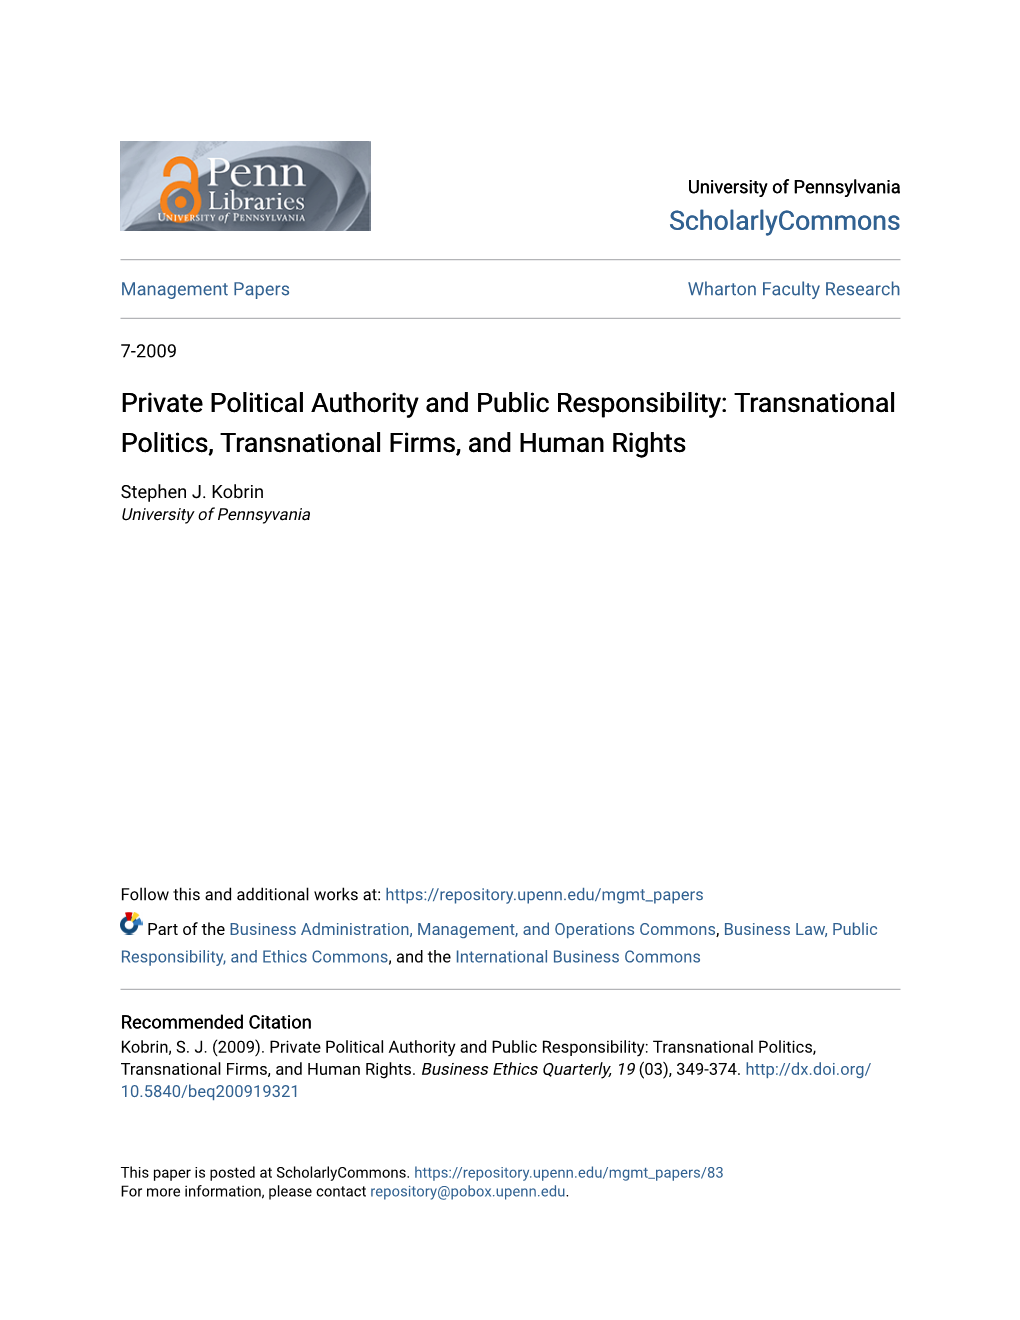 Private Political Authority and Public Responsibility: Transnational Politics, Transnational Firms, and Human Rights